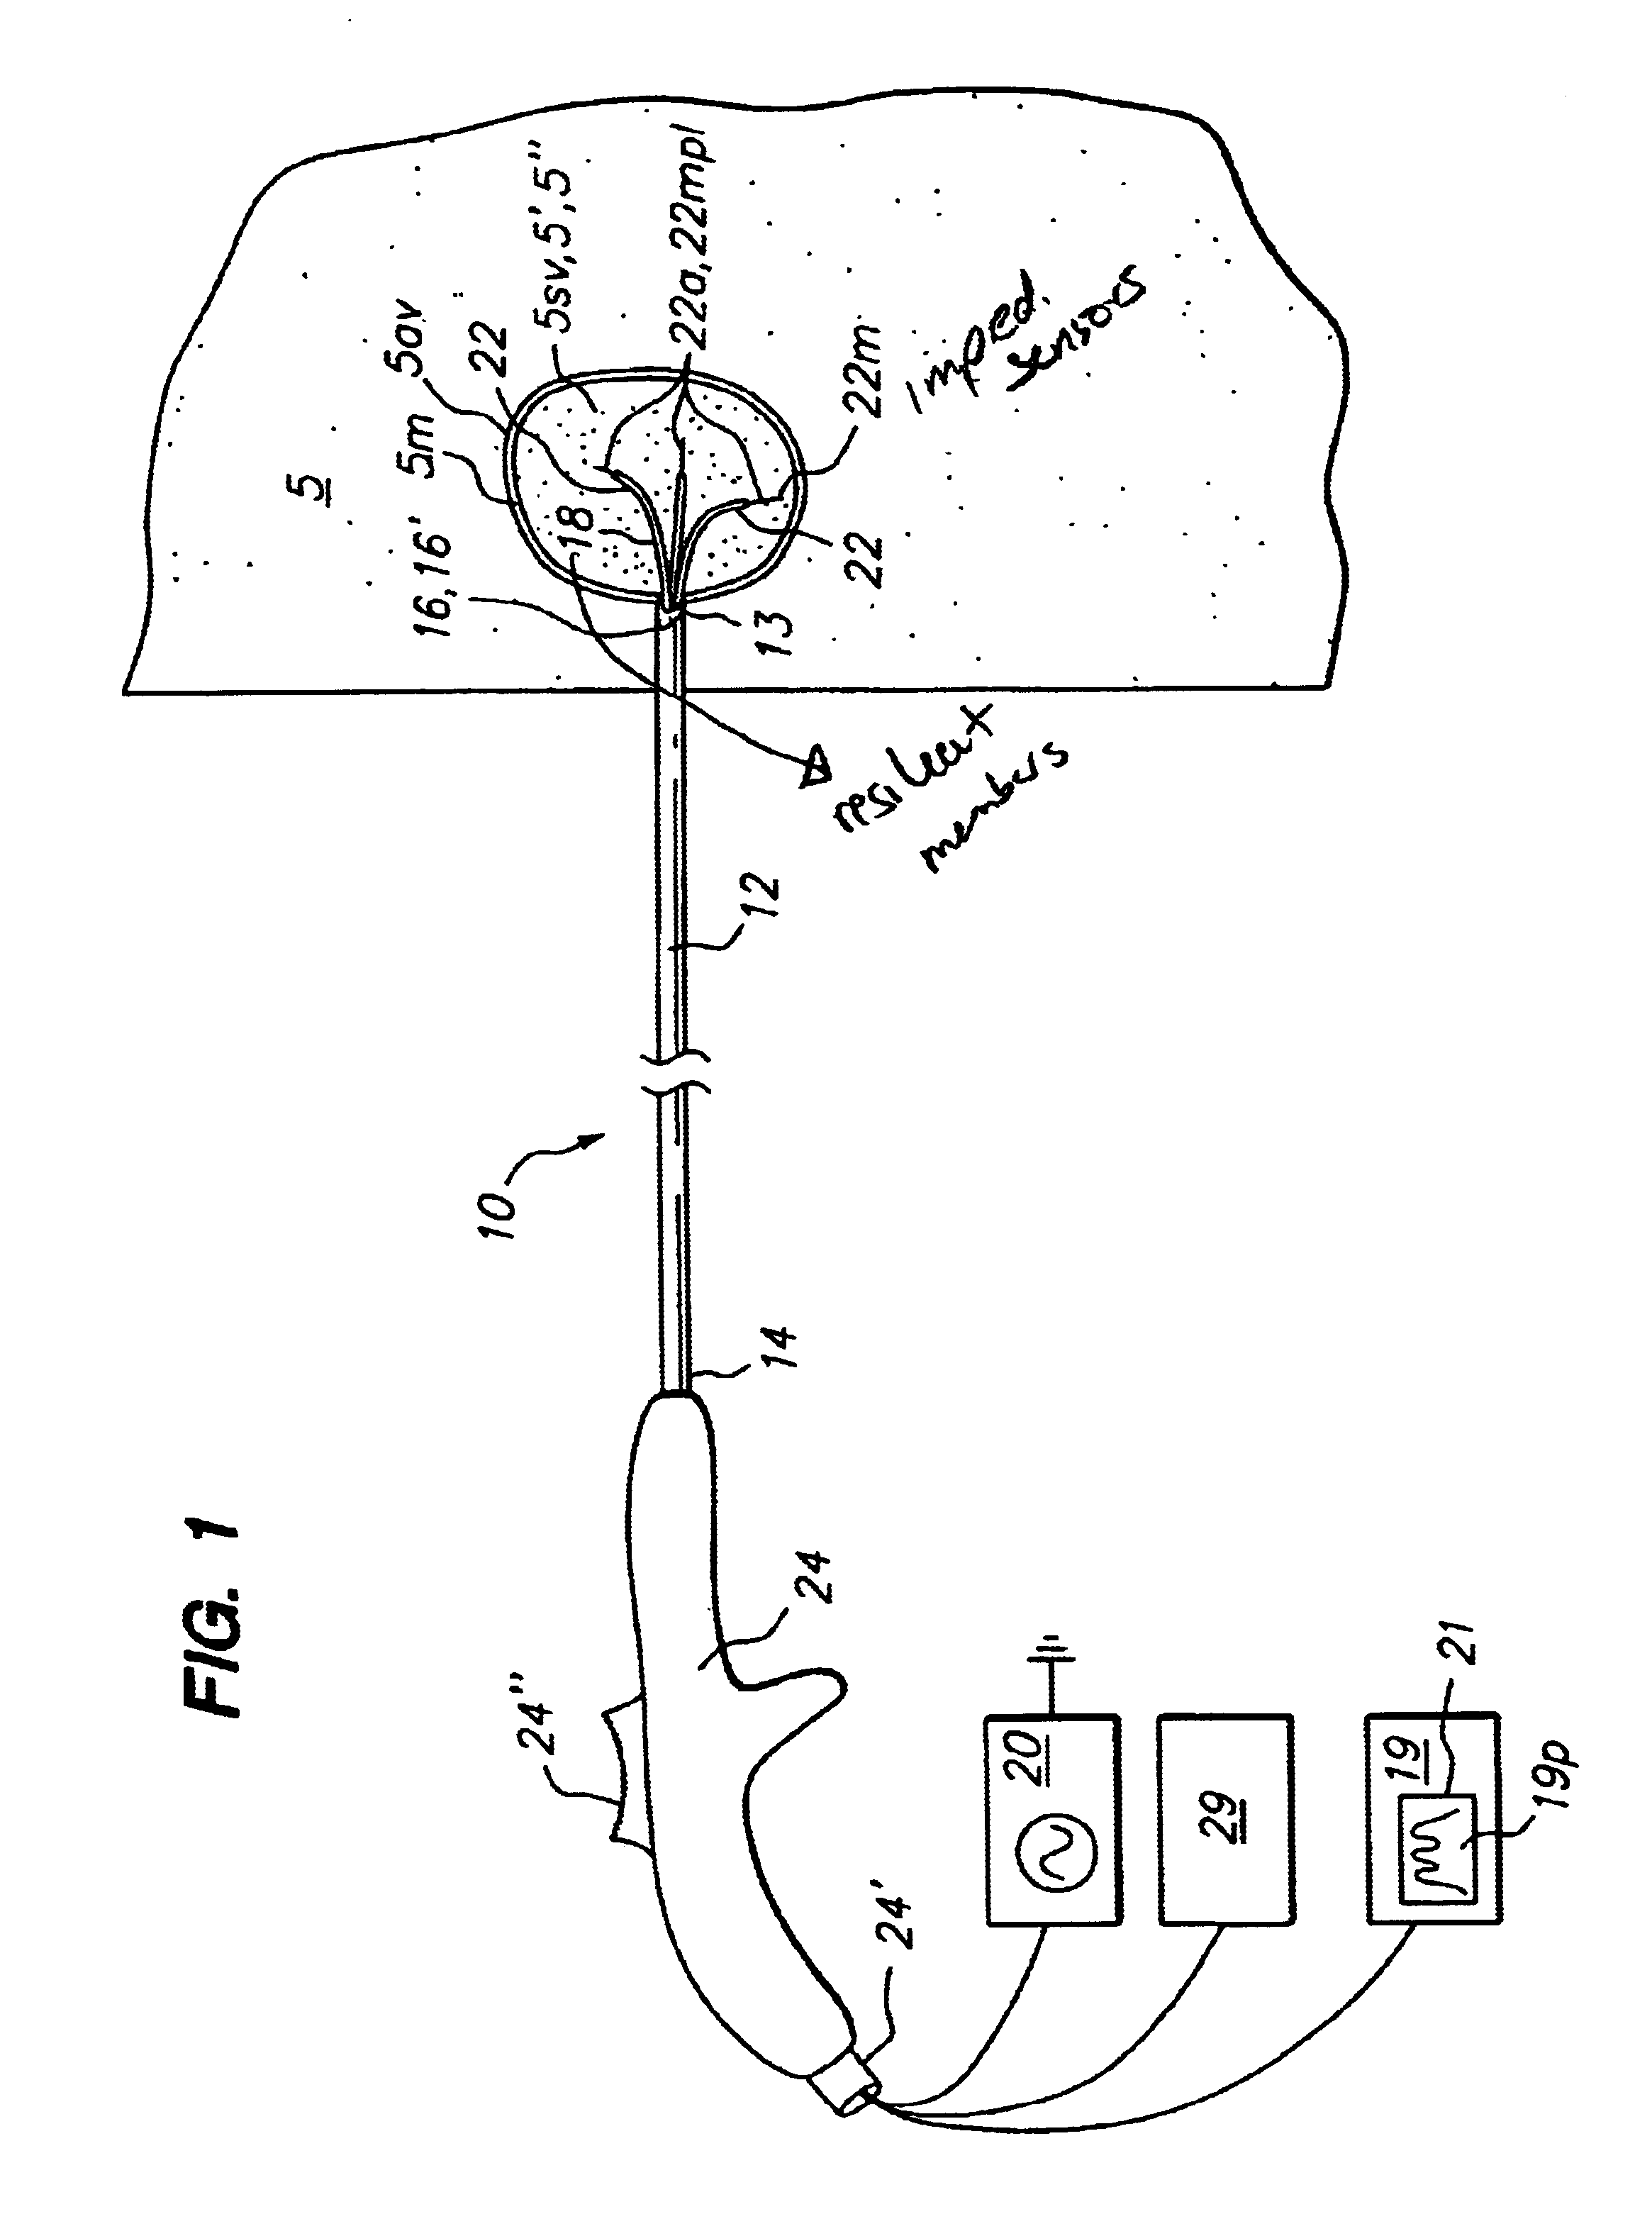 Method for detecting and treating tumors using localized impedance measurement